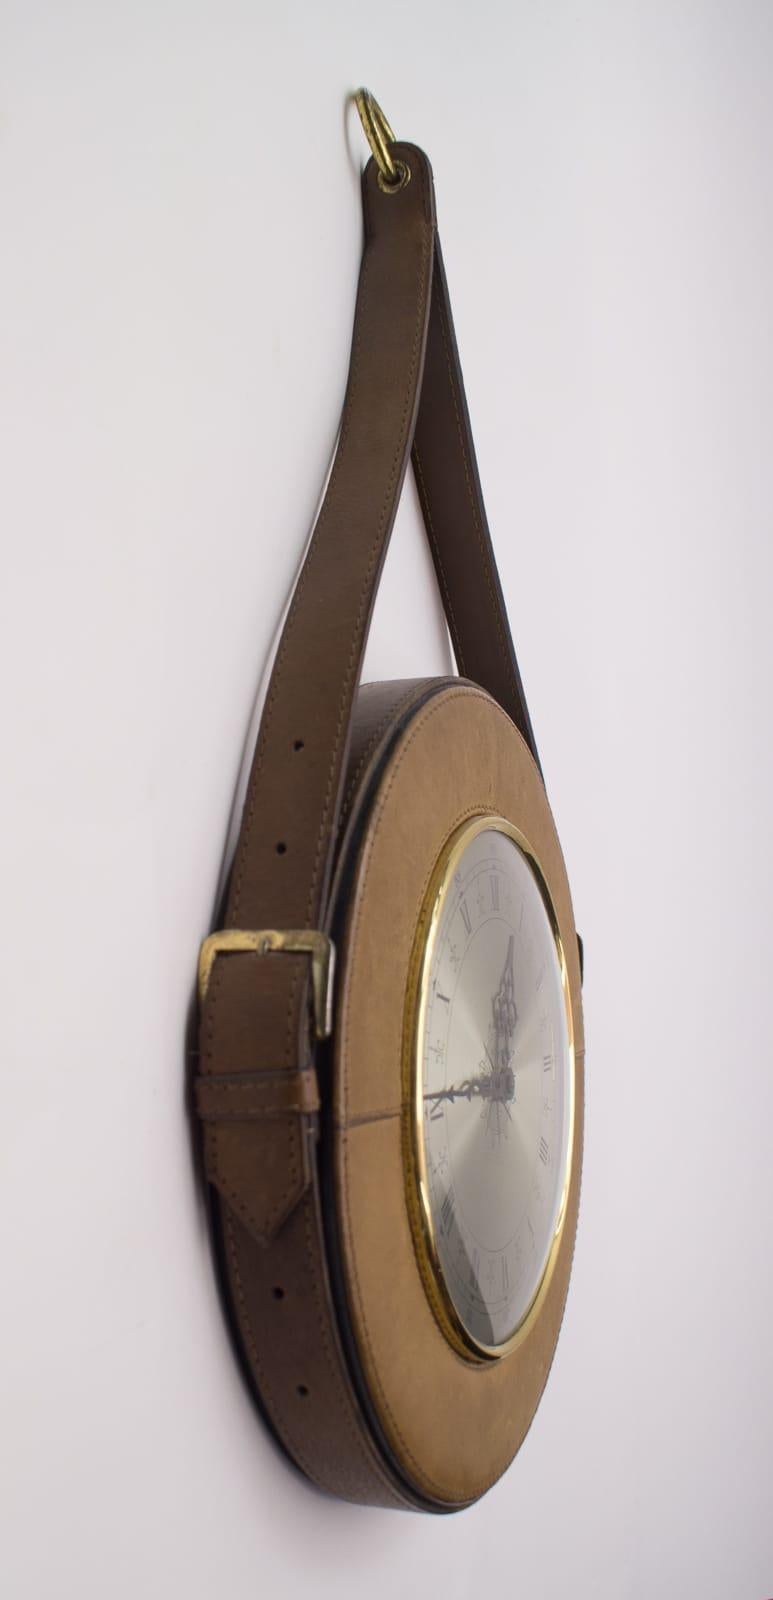 The clock is round, surrounded by leather straps, connected by brass hinges as belt buckles. The Brass ring allows it to be suspended.

Made in Germany.

Electric, battery operated clock.